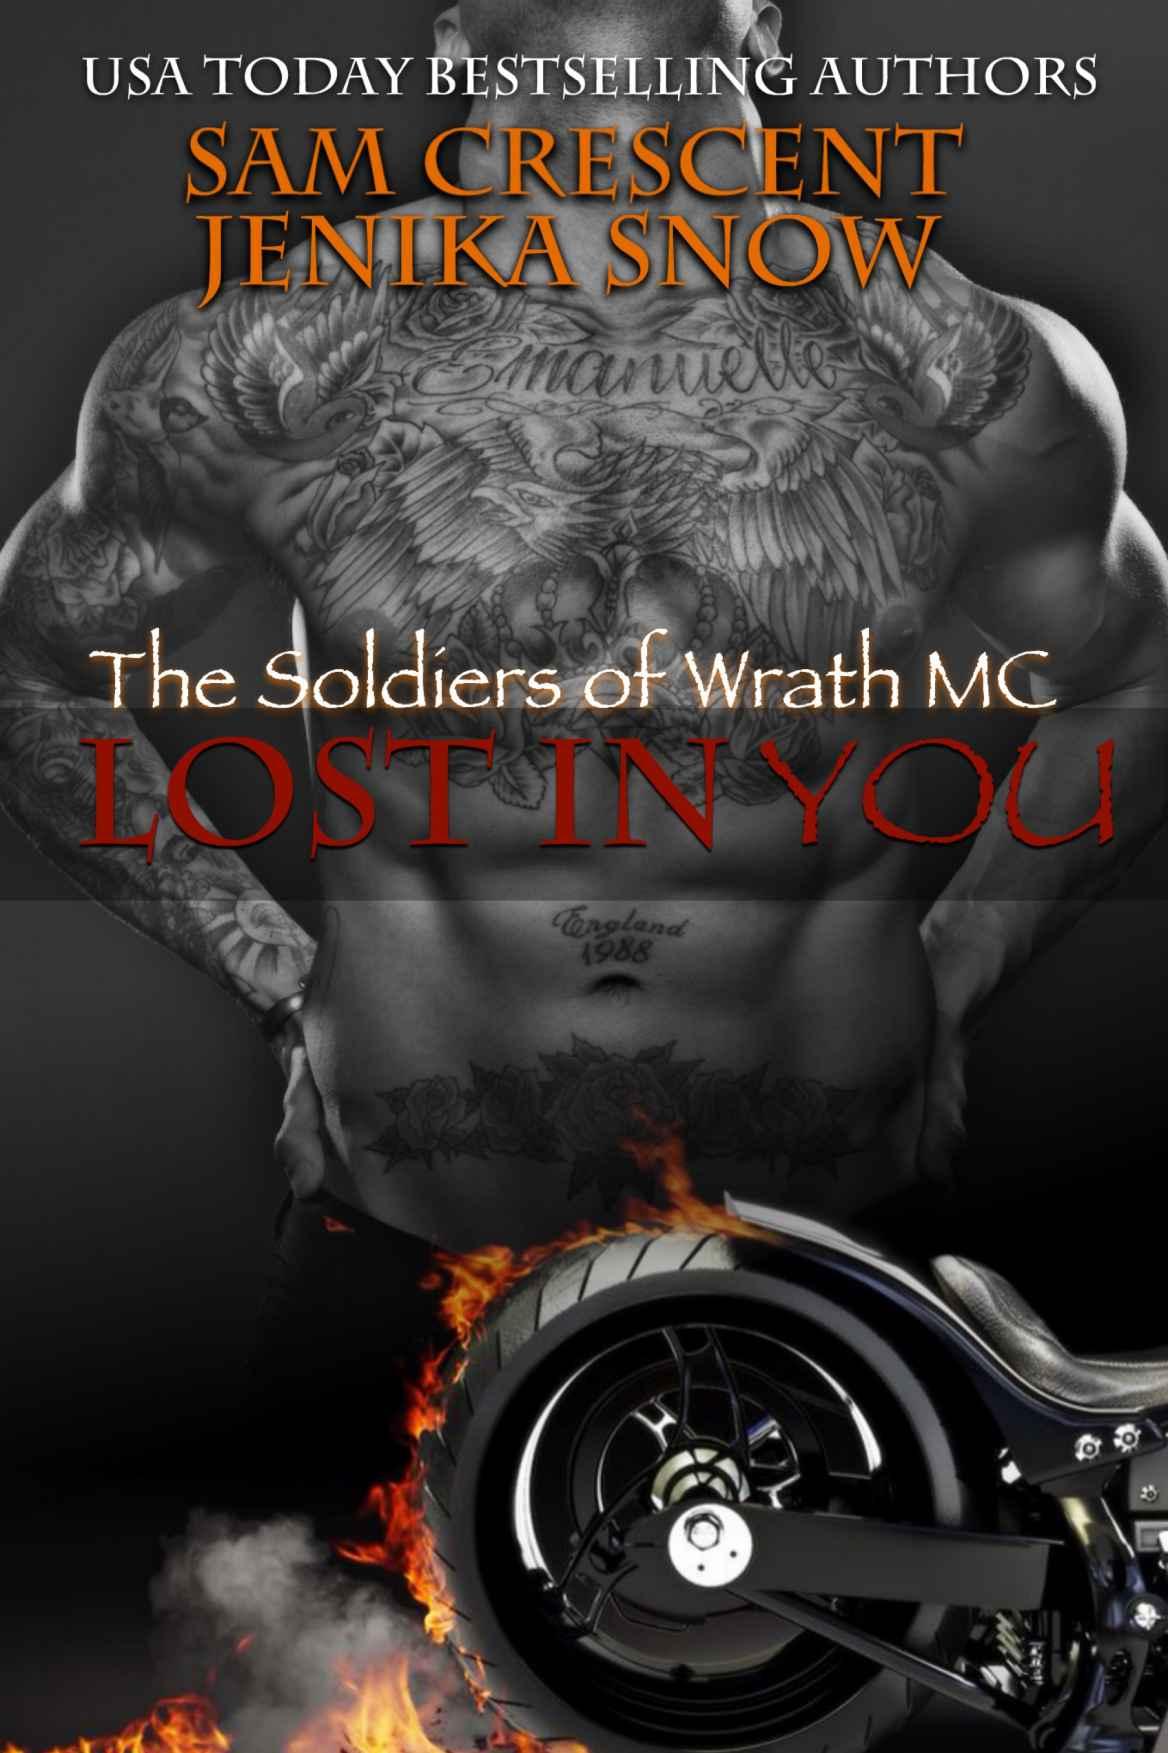 Lost In You (The Soldiers of Wrath MC) by Jenika Snow